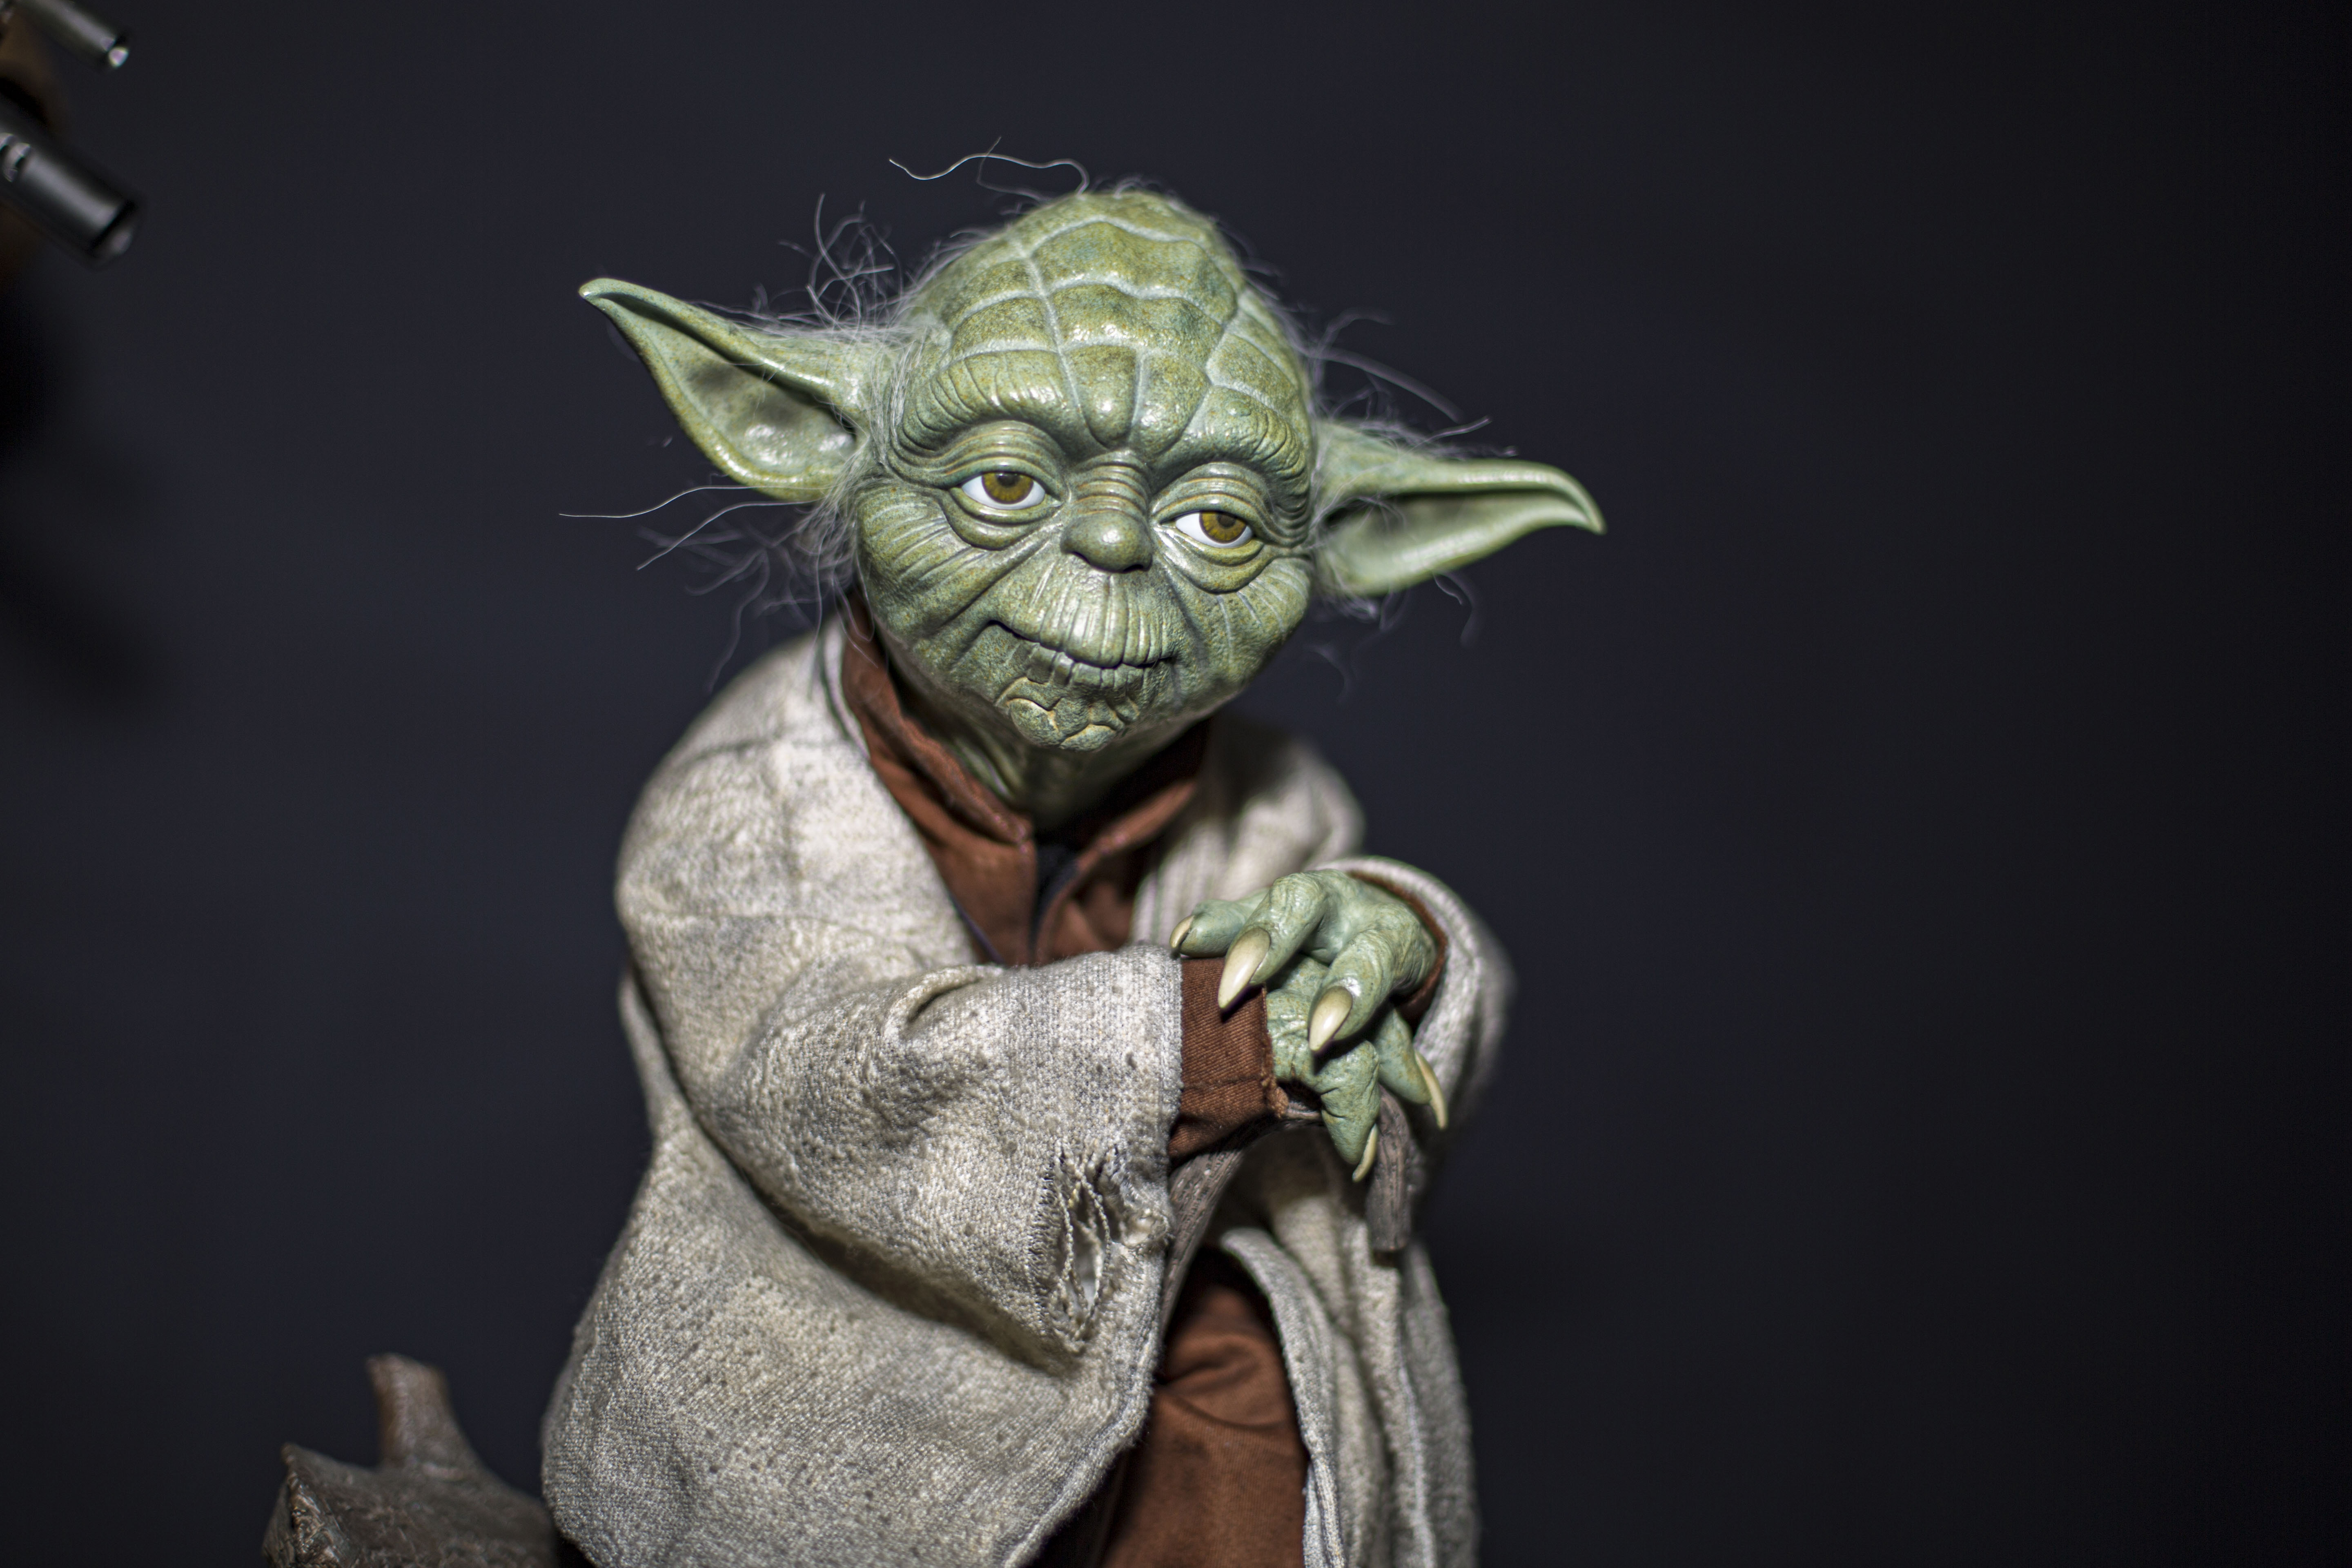 Baby Yoda Merch Is About to Rule the Retail Galaxy. Here's Where You Can Buy Toys and T-Shirts